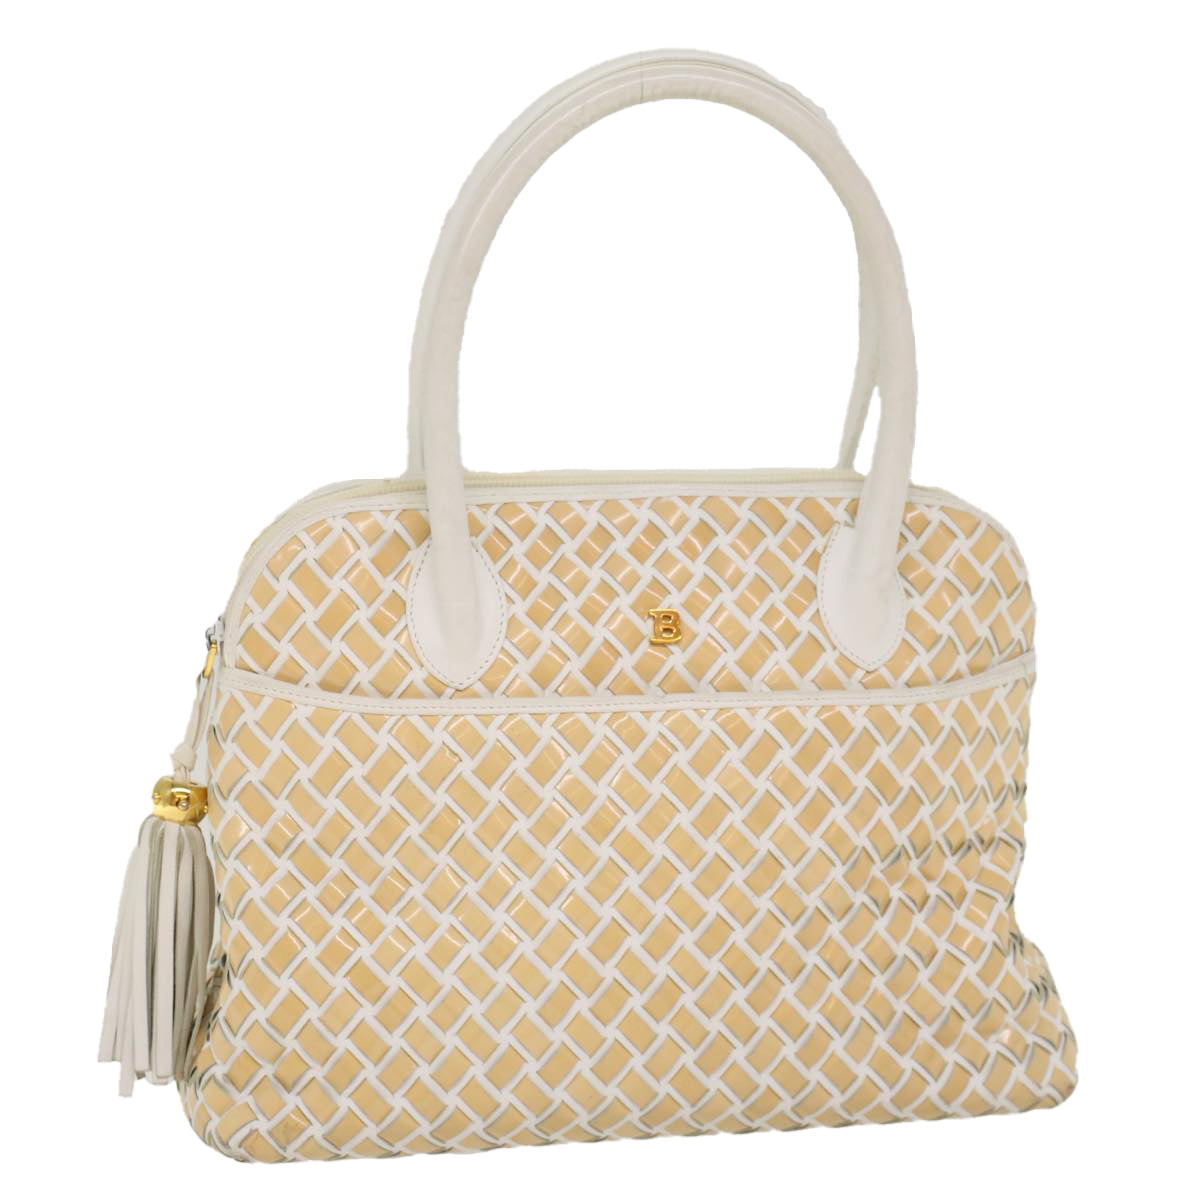 BALLY Hand Bag Patent leather Beige Auth yk8567